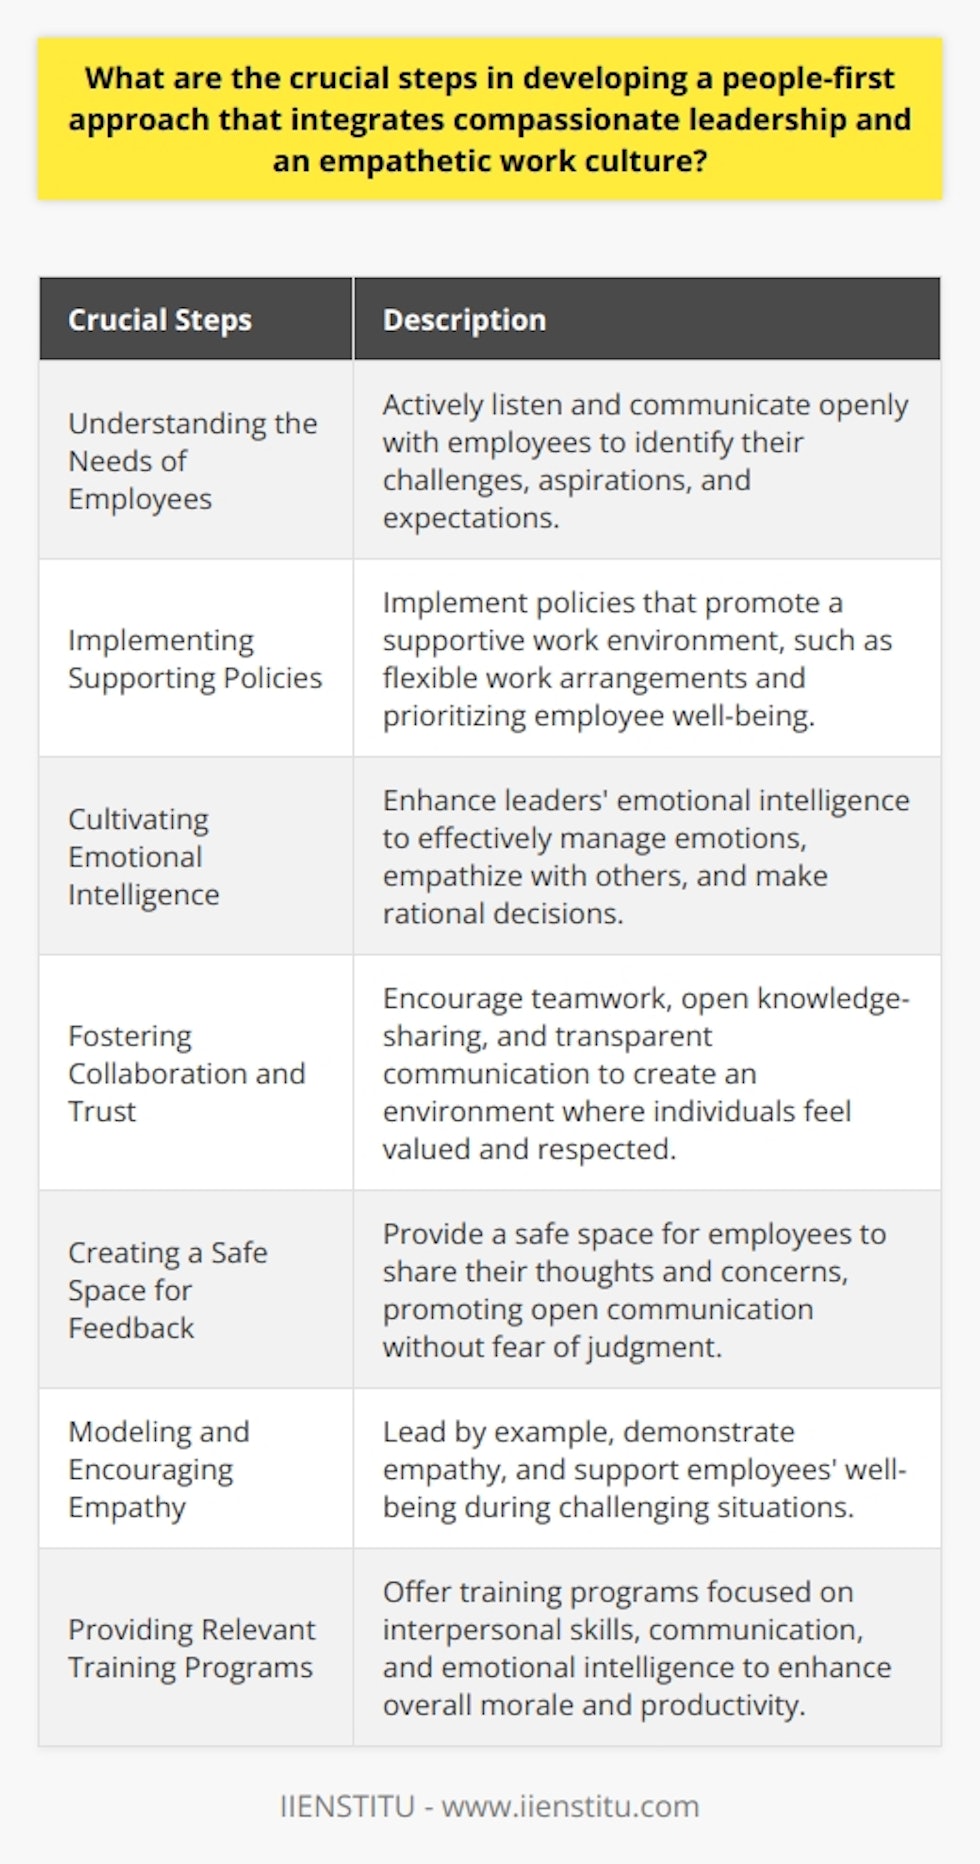 Developing a people-first approach that integrates compassionate leadership and an empathetic work culture is crucial for creating a supportive and engaging environment for employees. Here are the crucial steps to follow:1. Understanding the Needs of Employees: Leaders must actively listen and communicate openly with employees to identify their challenges, aspirations, and expectations. This understanding serves as the foundation for developing effective strategies and policies.2. Implementing Supporting Policies: Once the needs of employees are established, it is essential to implement policies that promote a supportive work environment. These policies can include flexible work arrangements, promoting work-life balance, and prioritizing employee well-being.3. Cultivating Emotional Intelligence: Enhancing leaders' emotional intelligence is vital for a people-first approach. Emotional intelligence allows leaders to manage their emotions and those of their team members, enabling them to empathize with others while remaining rational decision-makers.4. Fostering Collaboration and Trust: An empathetic work culture thrives on collaboration and trust. Encouraging teamwork, open knowledge-sharing, and transparent communication creates an environment where individuals feel valued and respected, leading to increased engagement and satisfaction.5. Creating a Safe Space for Feedback: Providing a safe space for employees to share their thoughts and concerns is essential for a compassionate and empathetic work culture. This encourages open communication and allows employees to express themselves without fear of judgment or negative consequences.6. Modeling and Encouraging Empathy: Leaders must lead by example and demonstrate empathy in their daily operations. Expressing genuine care and concern for employees' well-being and supporting them during challenging situations helps integrate compassion into leadership roles.7. Providing Relevant Training Programs: Offering training programs focused on interpersonal skills, communication, and emotional intelligence equips employees with the necessary tools to develop and maintain empathetic relationships with their colleagues. This ultimately enhances overall morale and productivity.In conclusion, developing a people-first approach that integrates compassionate leadership and an empathetic work culture requires understanding employee needs, implementing supportive policies, cultivating emotional intelligence, fostering collaboration and trust, creating a safe space for feedback, modeling empathetic behavior, and providing relevant training programs. By following these crucial steps, organizations can create a positive and supportive work environment that prioritizes the well-being and satisfaction of their employees.